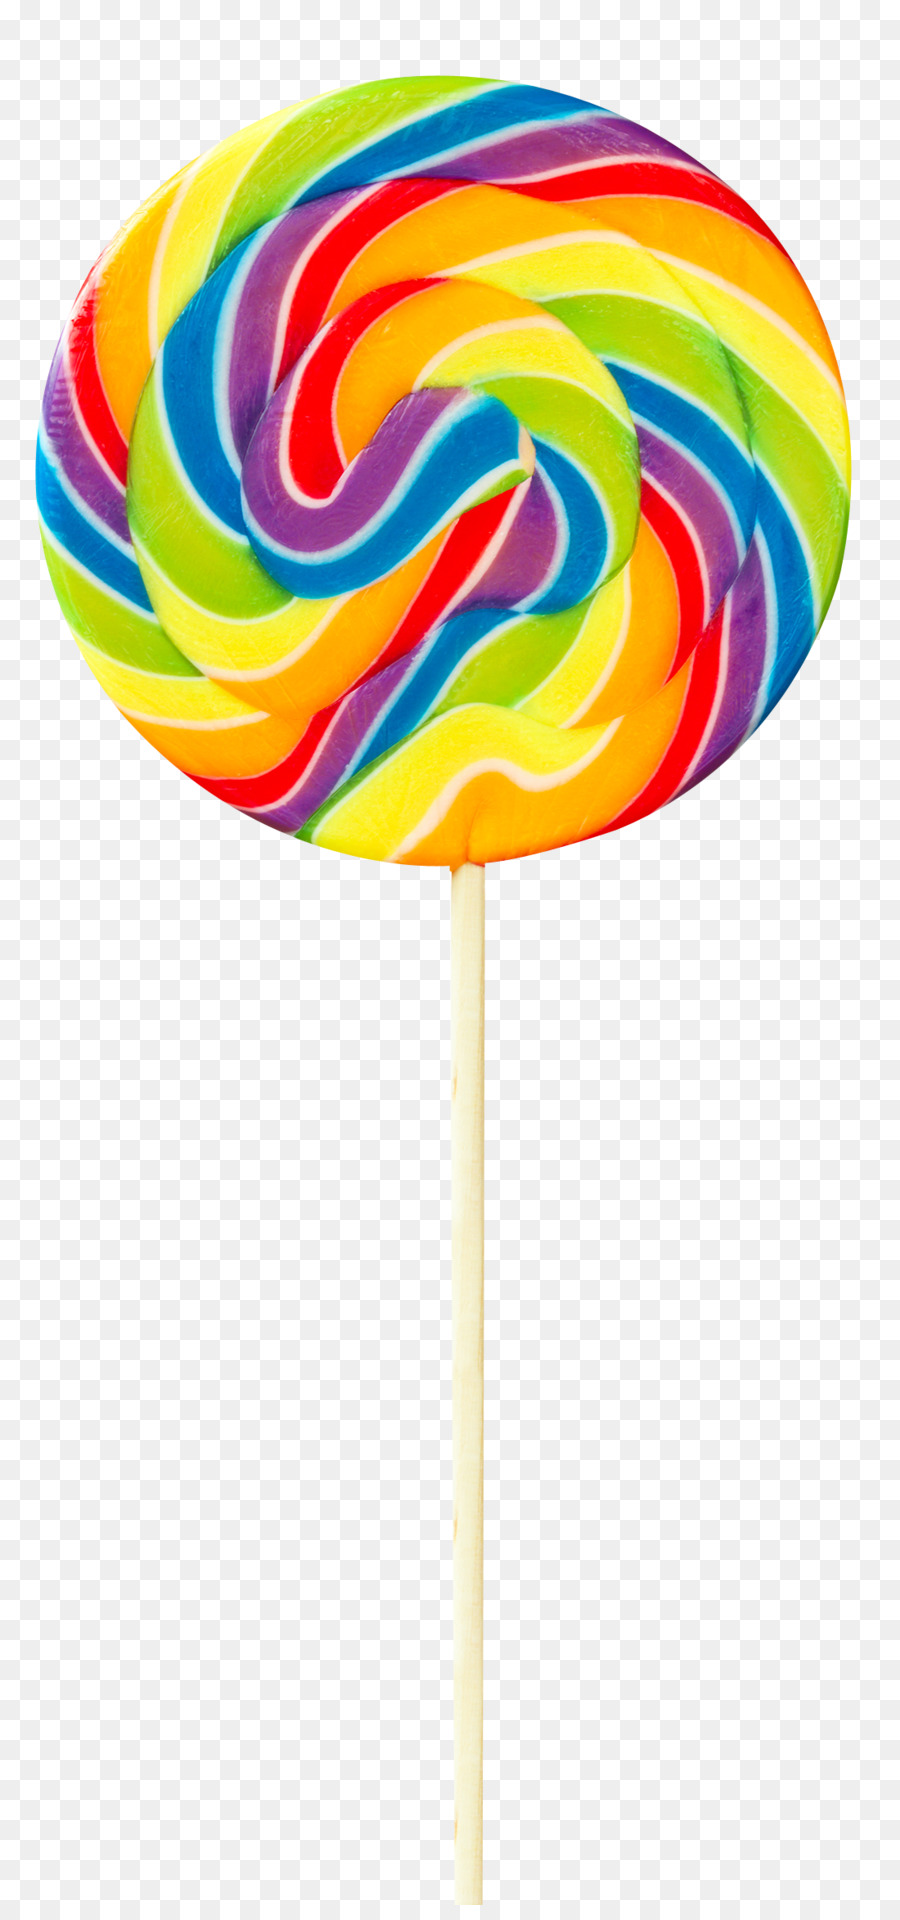 Android Lollipop Zamou015bu0107 Stick candy - Swirl Lollipop png download - 1100*2328 - Free Transparent Lollipop png Download.